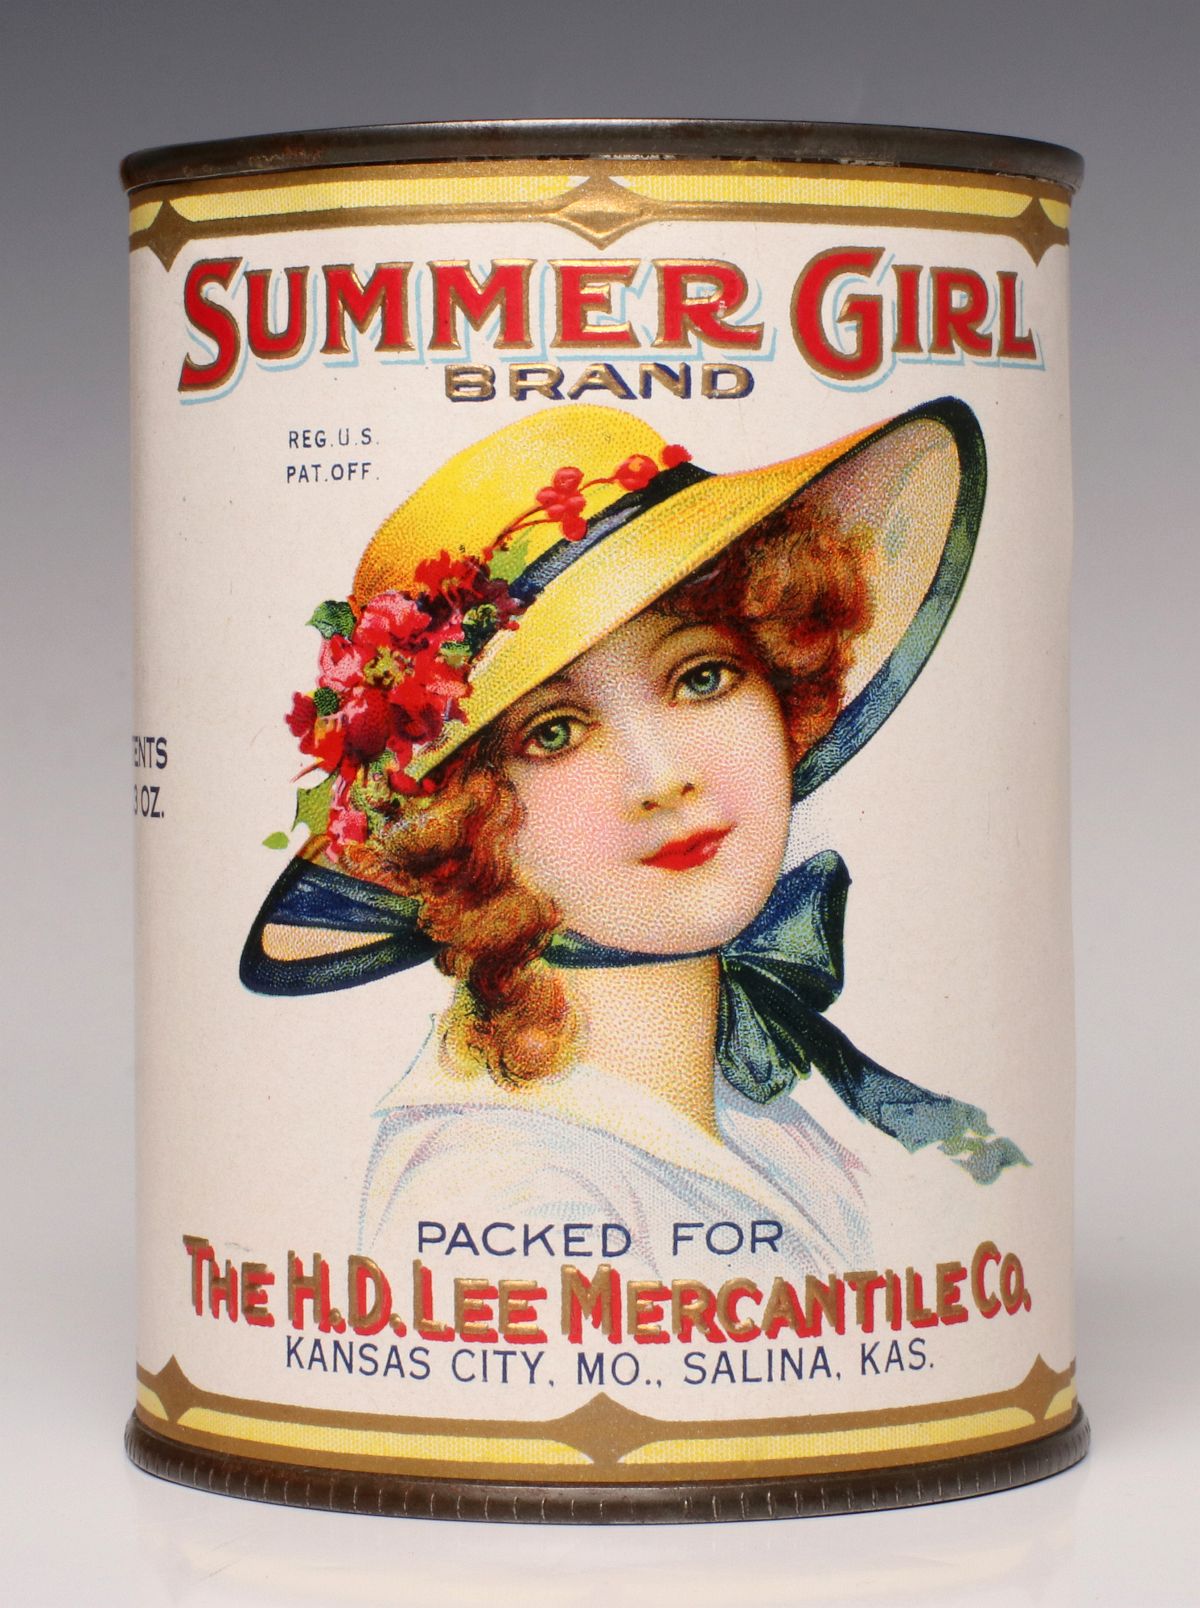 SUMMER GIRL BRAND WAX CUT BEANS CAN WITH LABEL